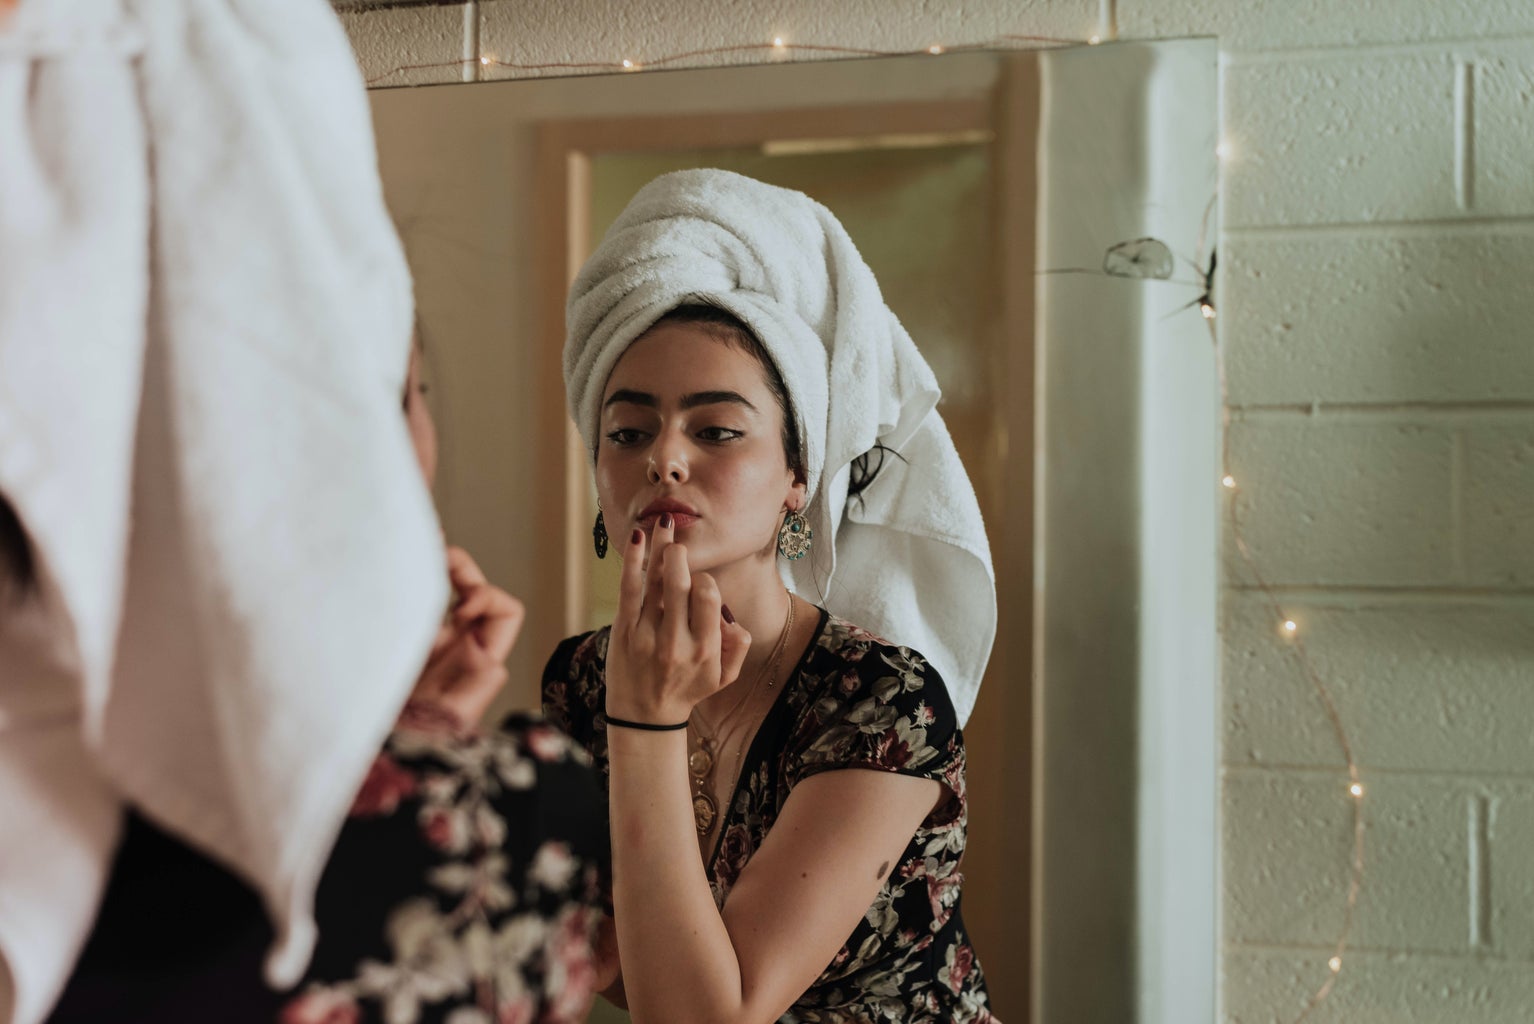 Woman putting lipstick on, a towel on her head.